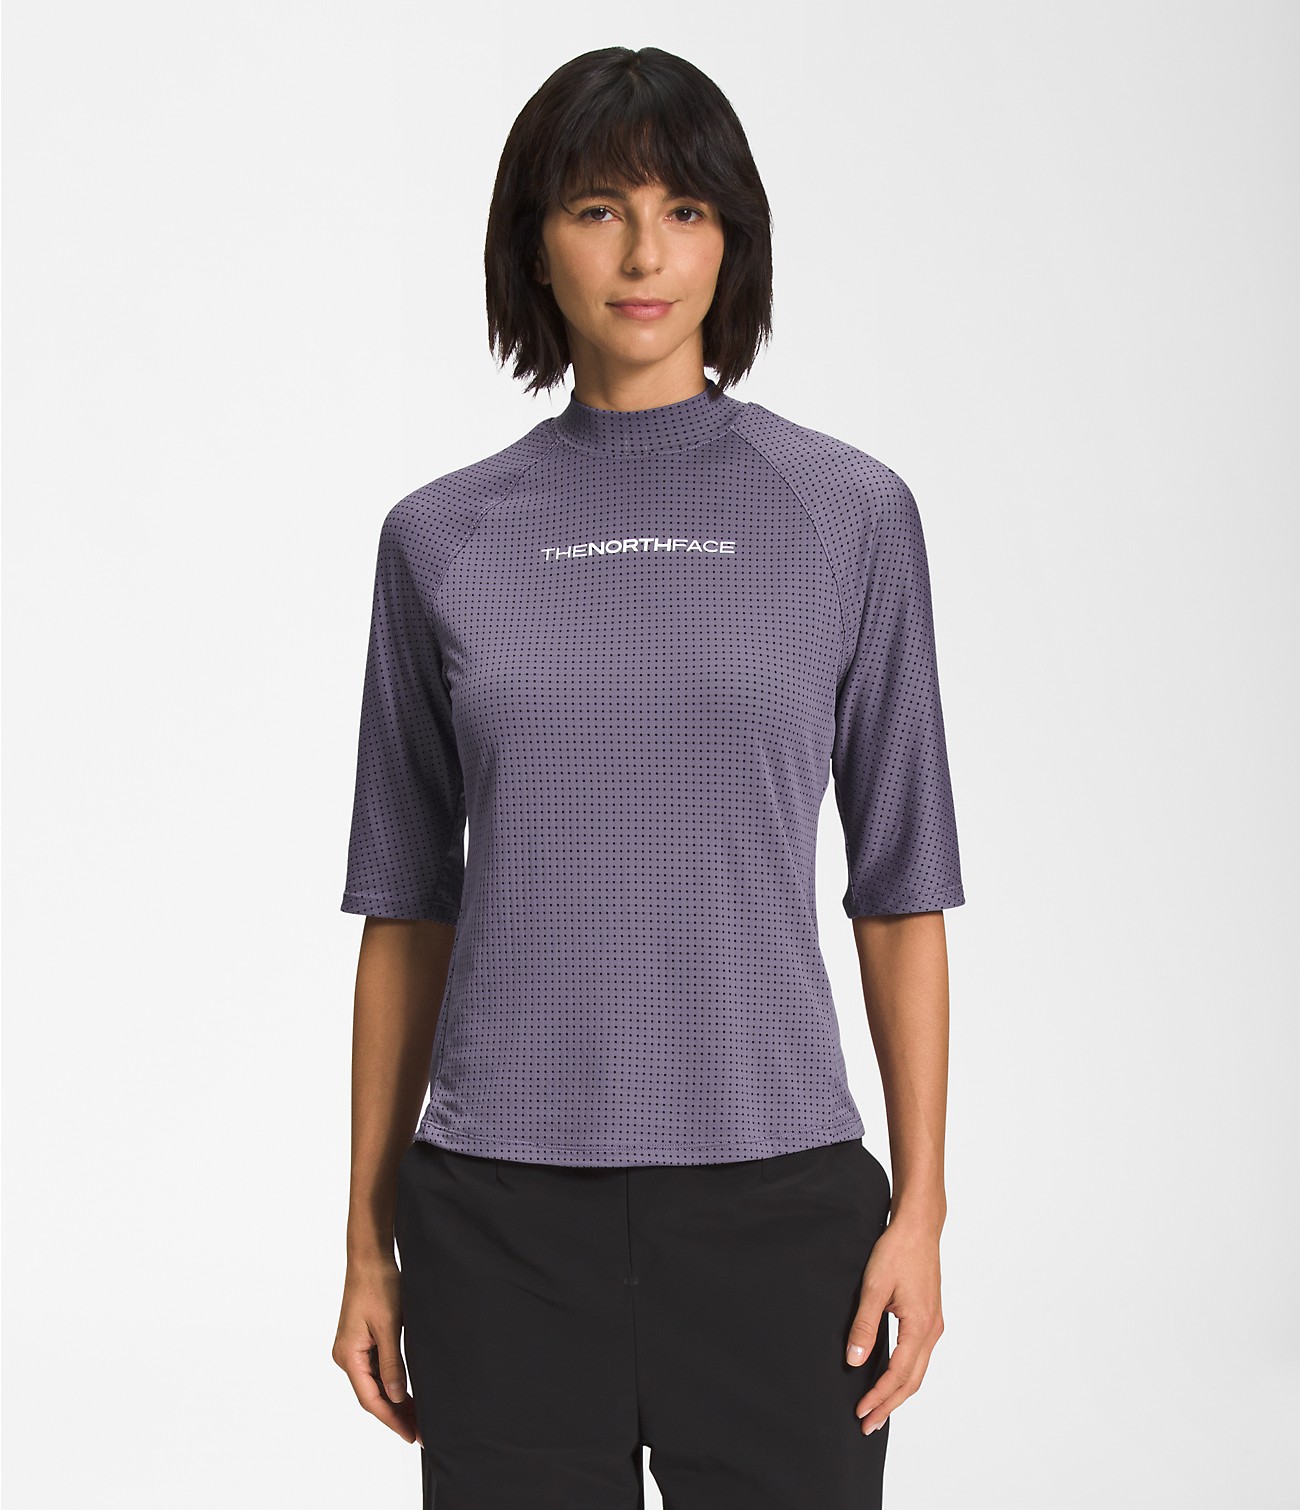 Women’s RMST DotKnit Short-Sleeve Top | The North Face